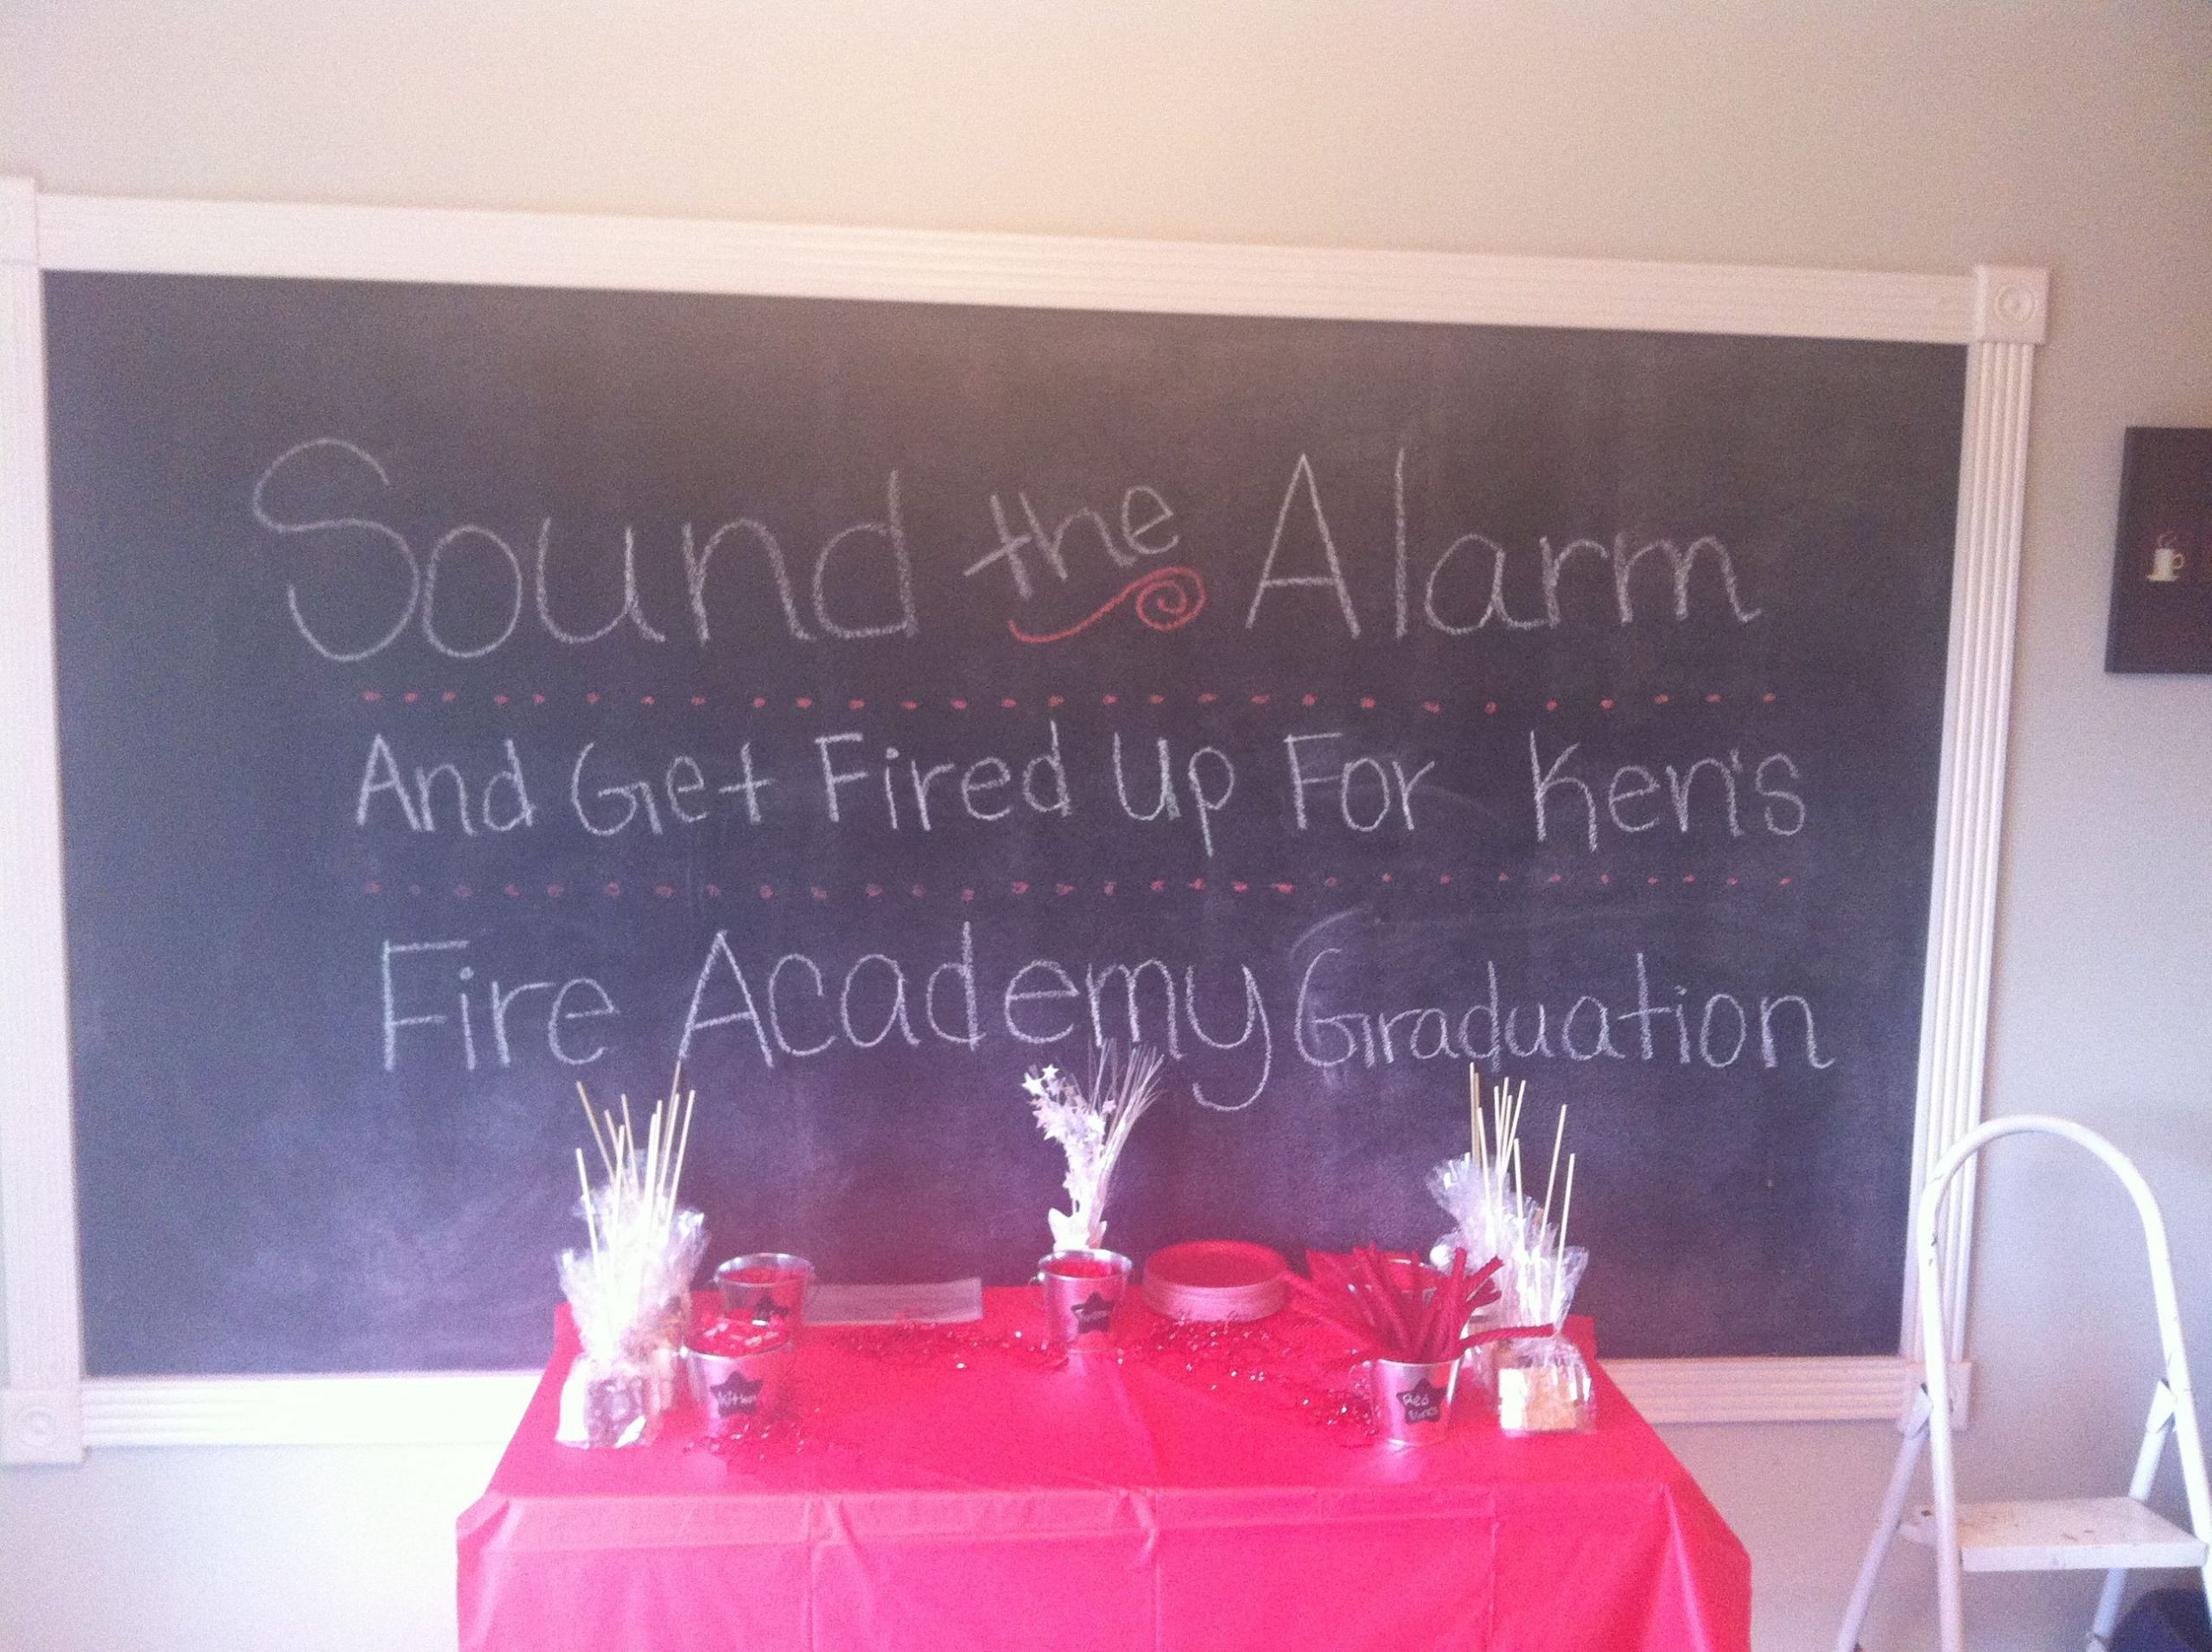 Firefighter Graduation Party Ideas
 Surprise grad party from fire academy